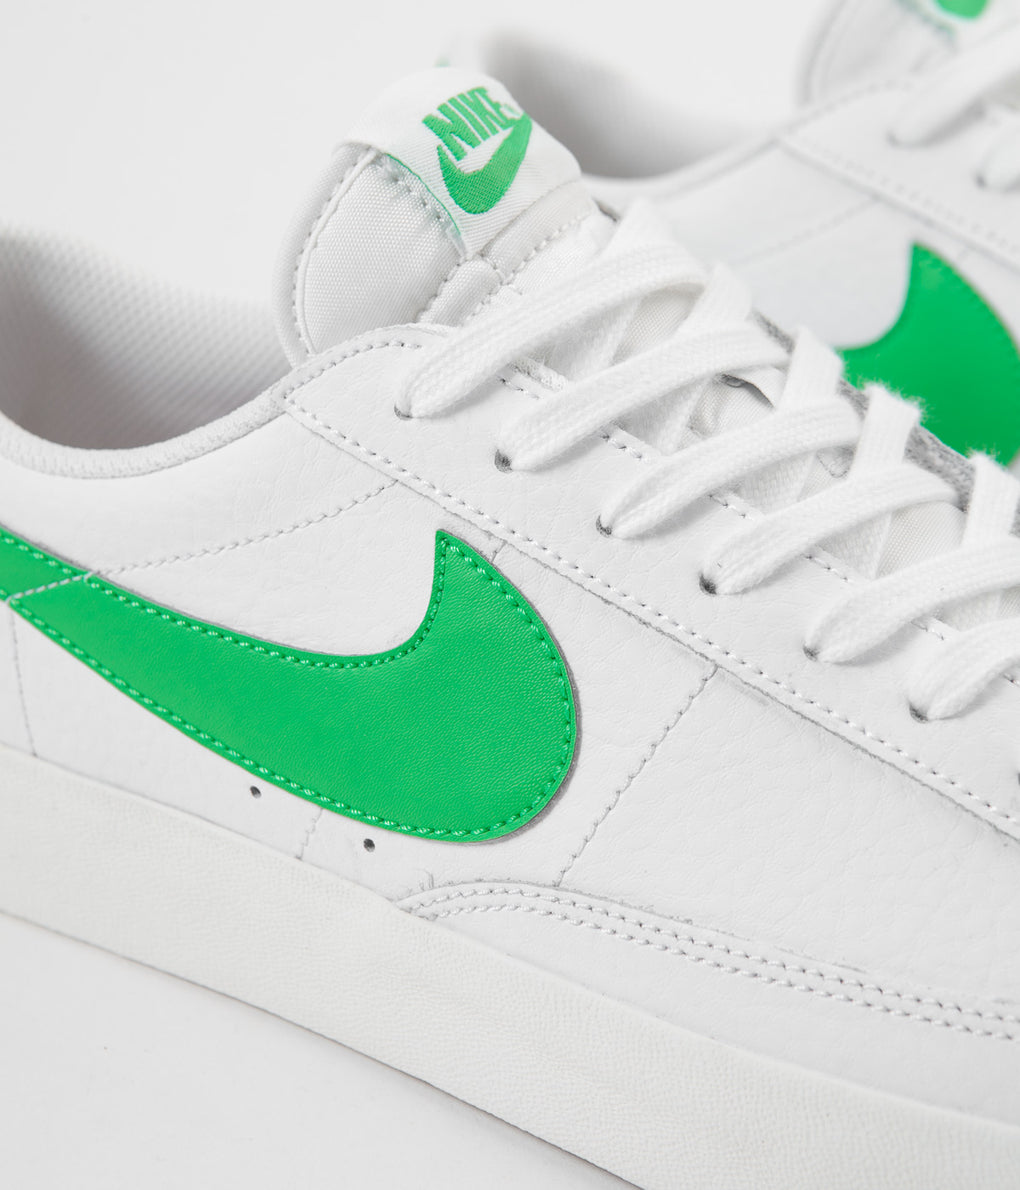 Nike Blazer Low Leather Shoes - White / Green Spark - Sail | Always in ...